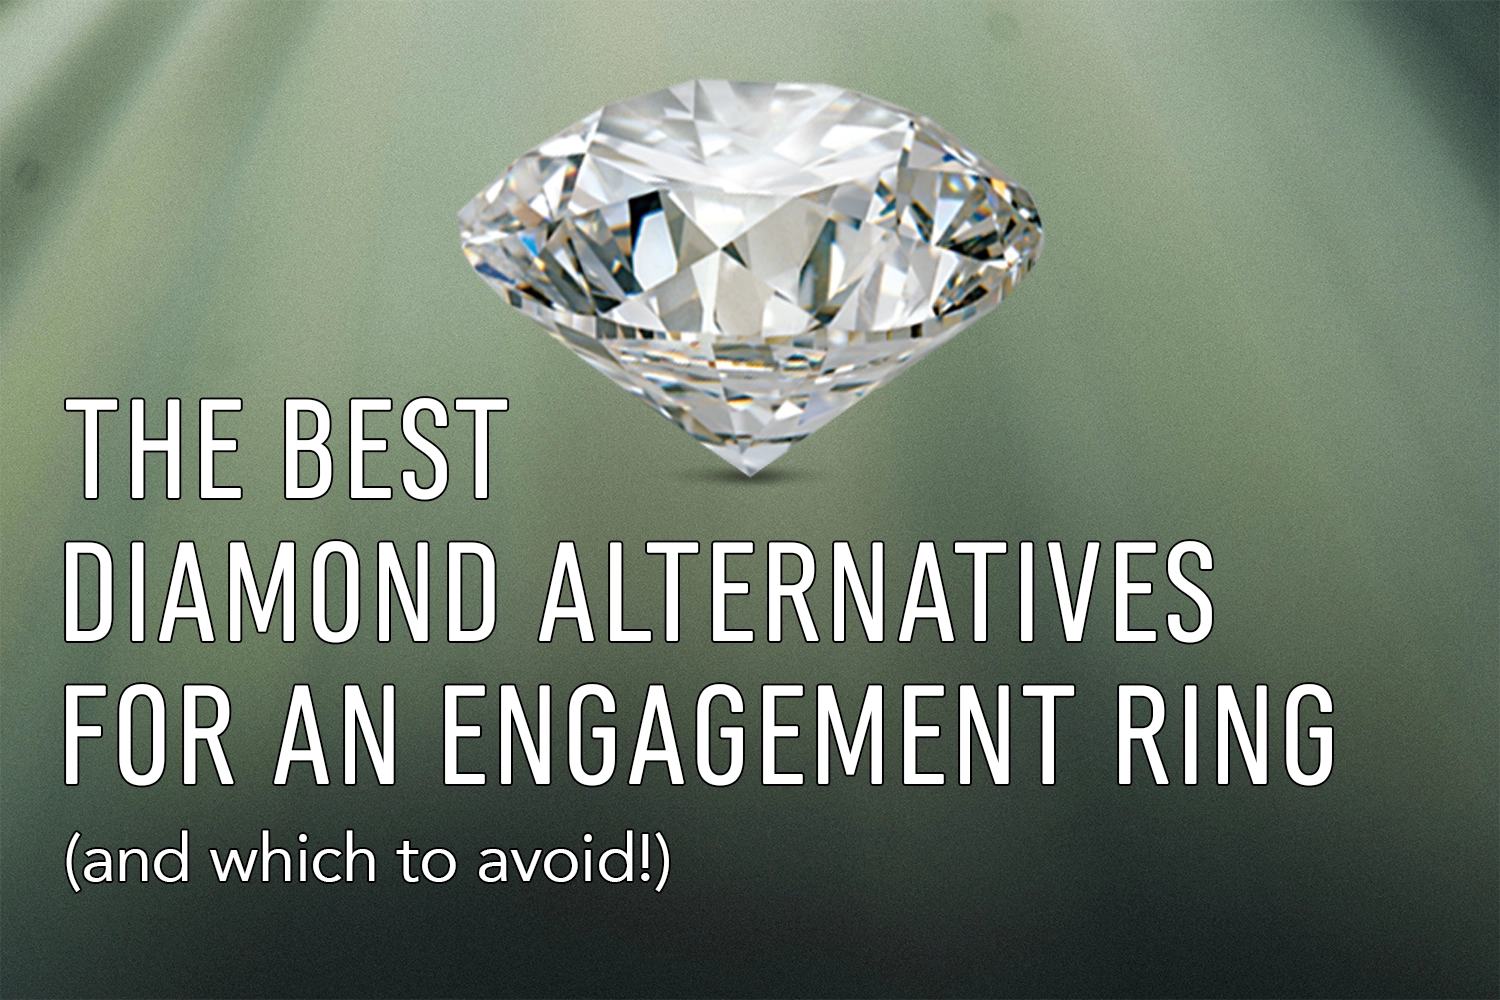 The Best Diamond Alternatives For An Engagement Ring (and which to avoid)